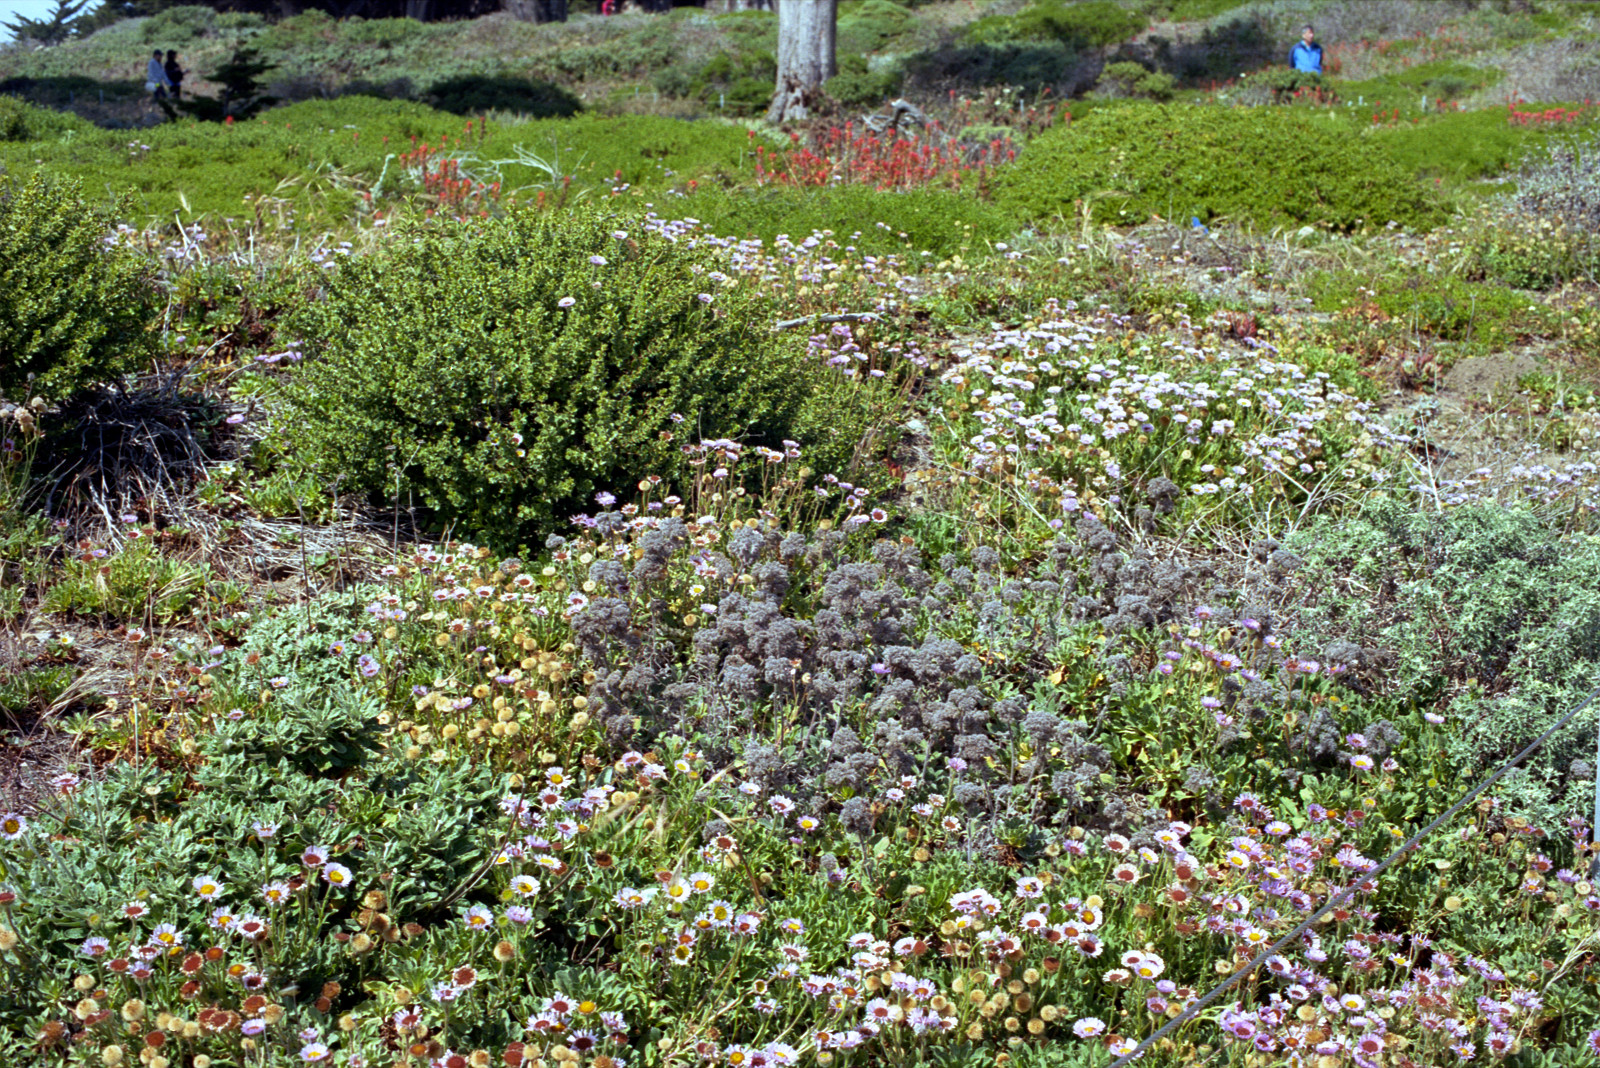 The flowers are spread out under the Monterey cypress forest at Lands End, San Francisco. There are trails from this point, one of them taking you all the way to Lincoln Park and the California Palace of the Legionof Honor.